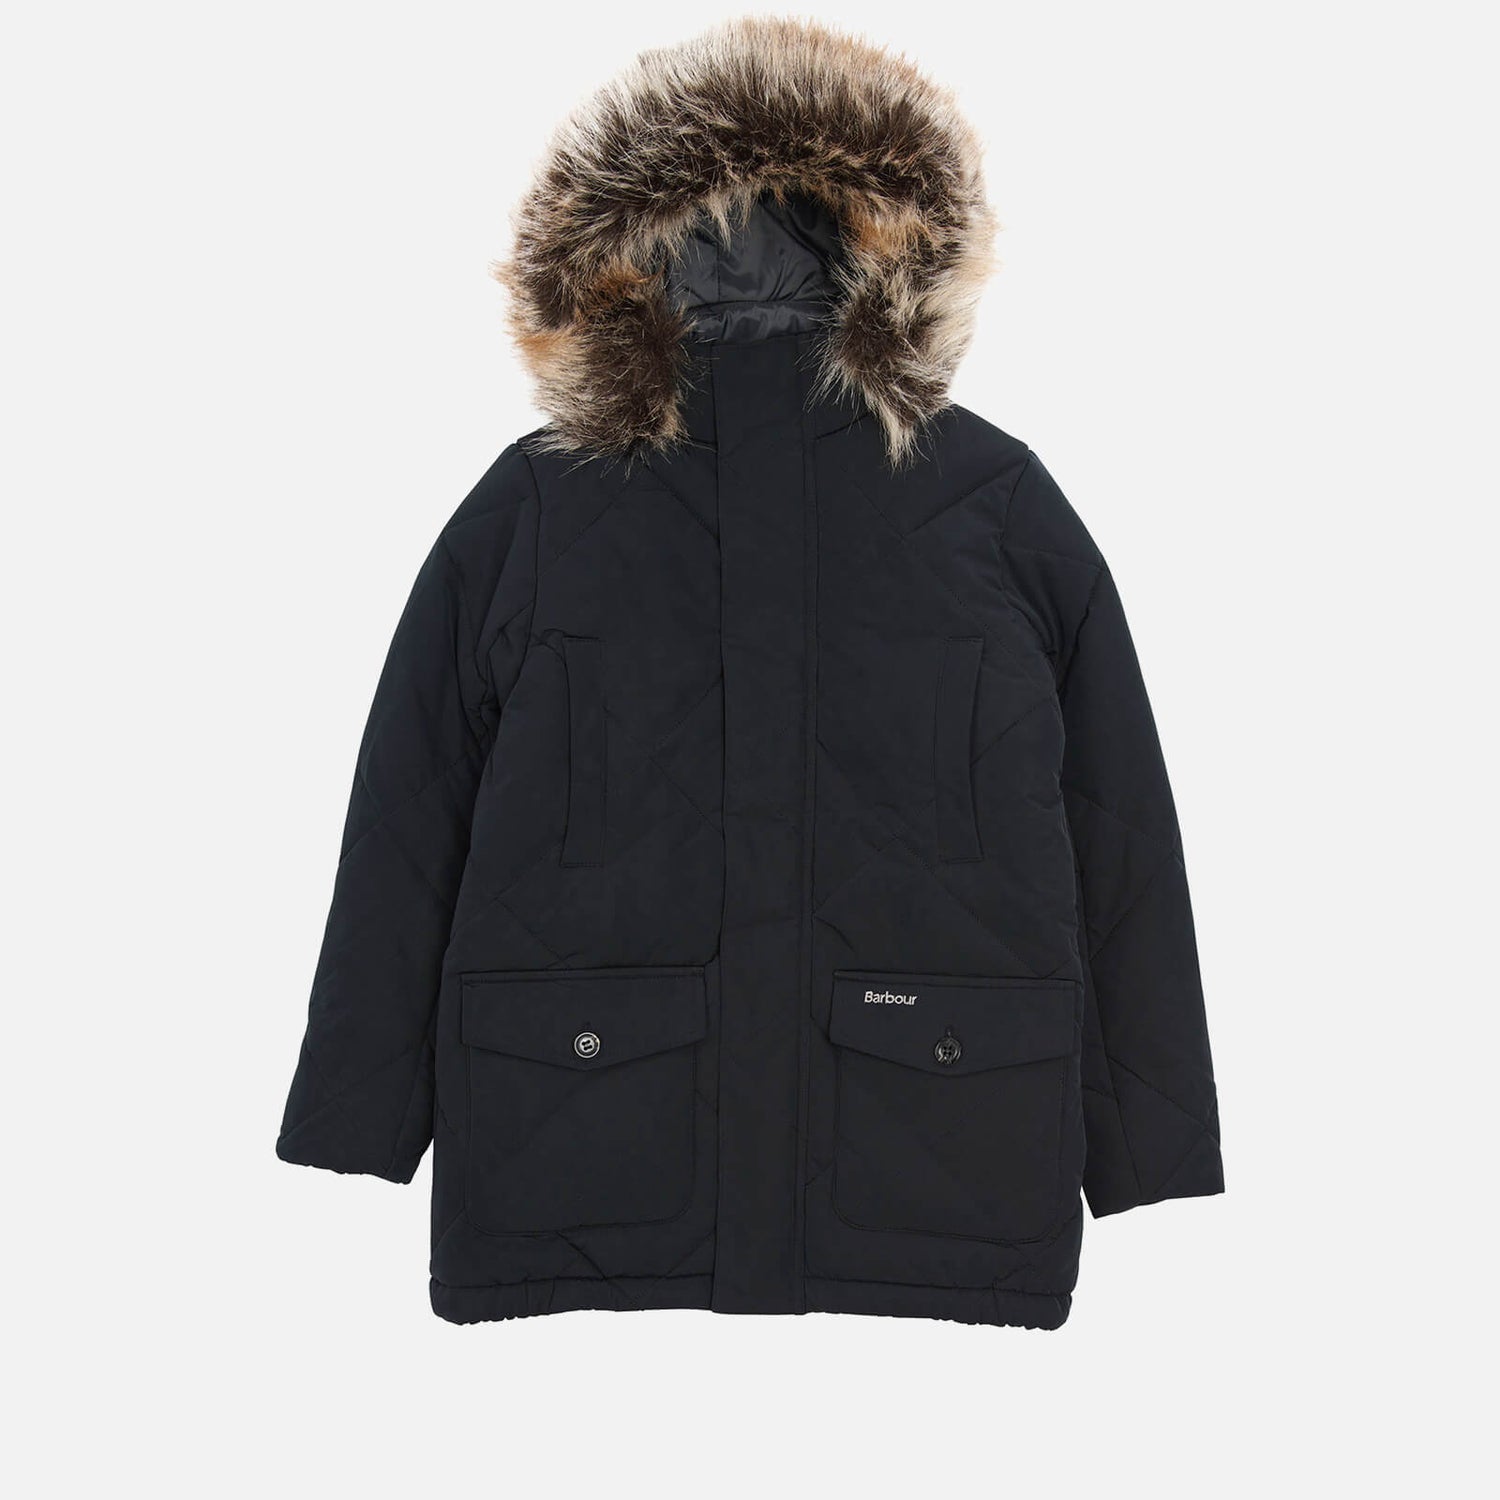 Barbour Dalbigh Hooded Shell Parka